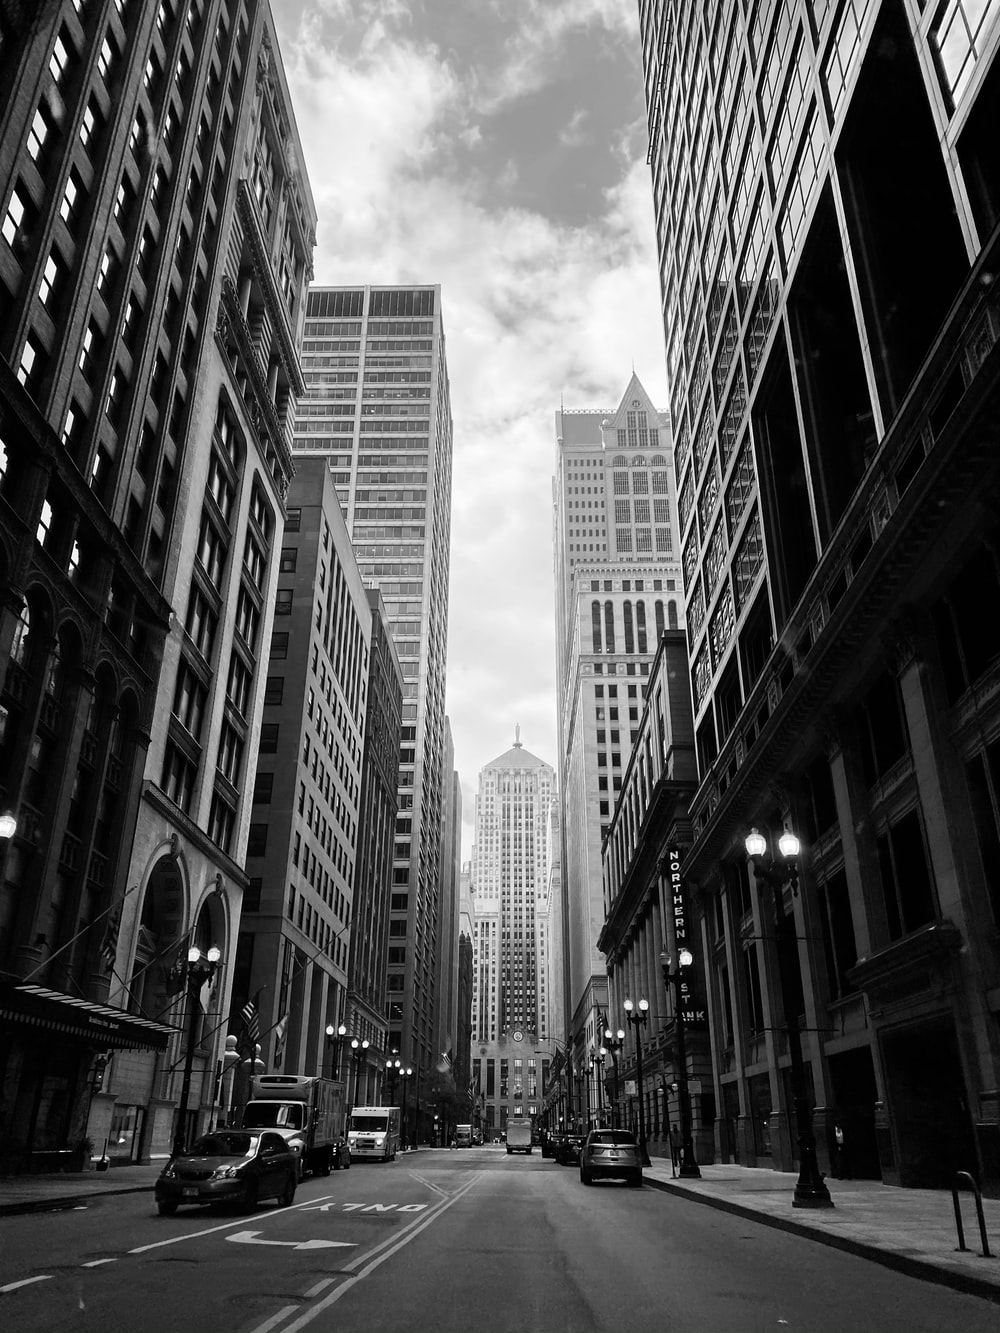 Grayscale Photo Of City Buildings Chicago Image On